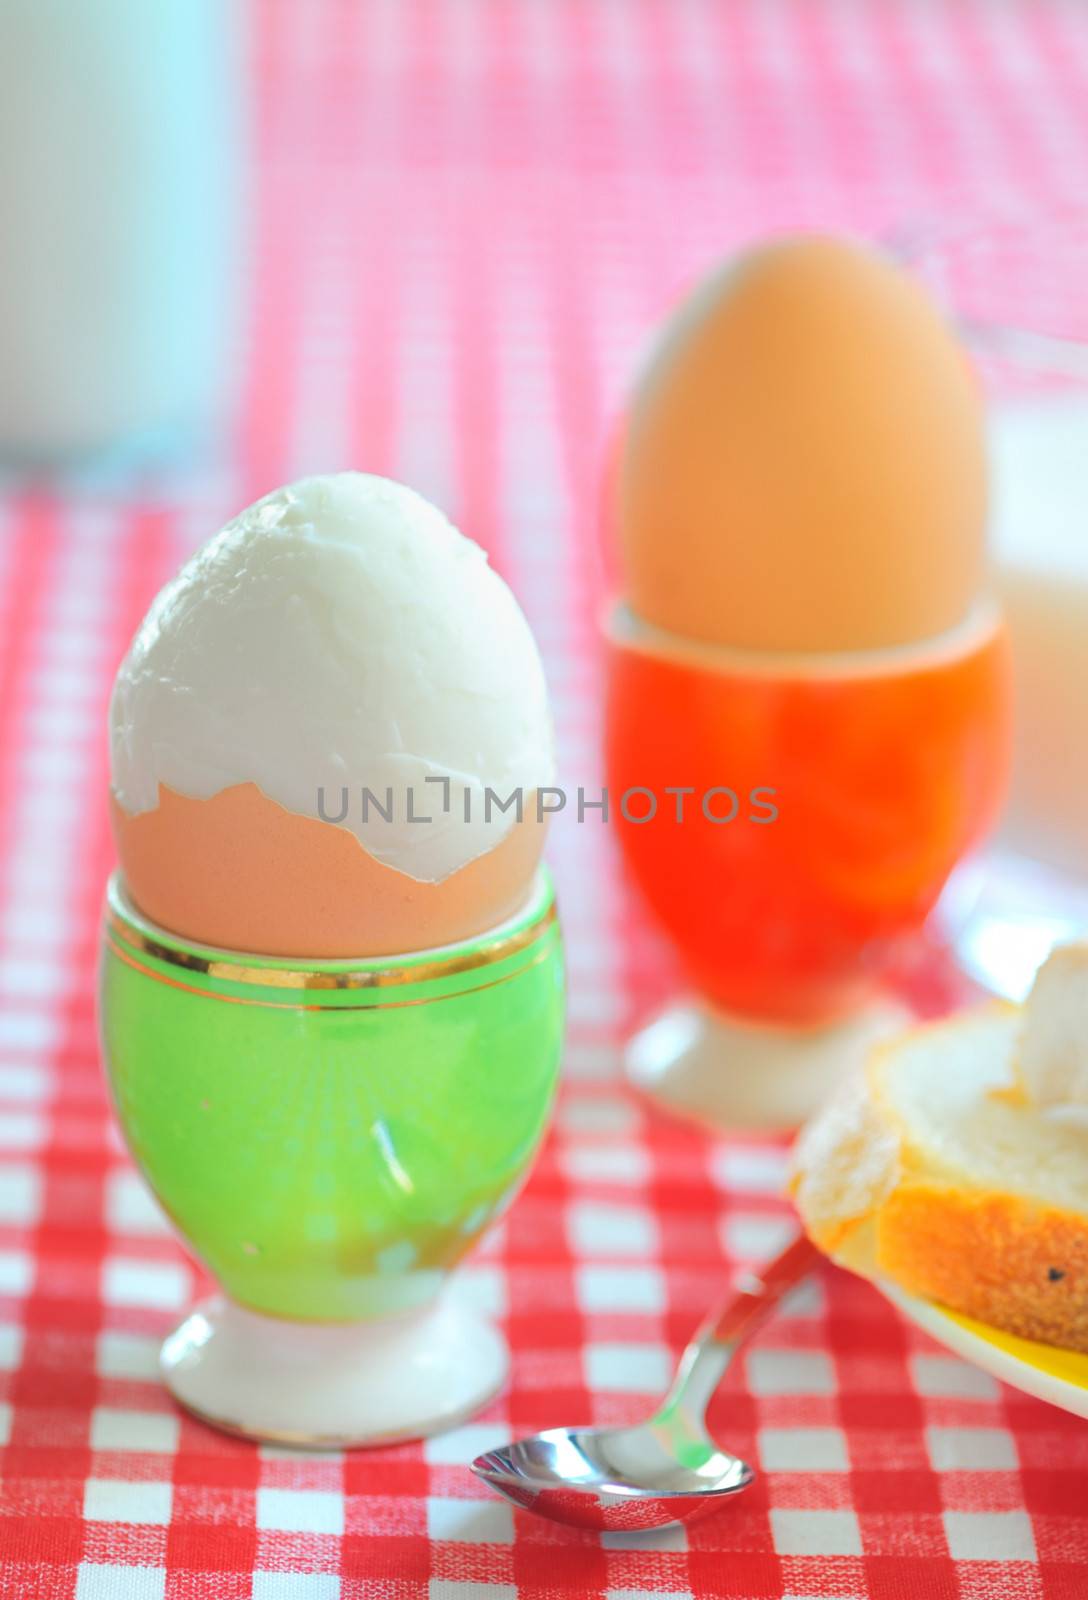 boiled eggs by mady70